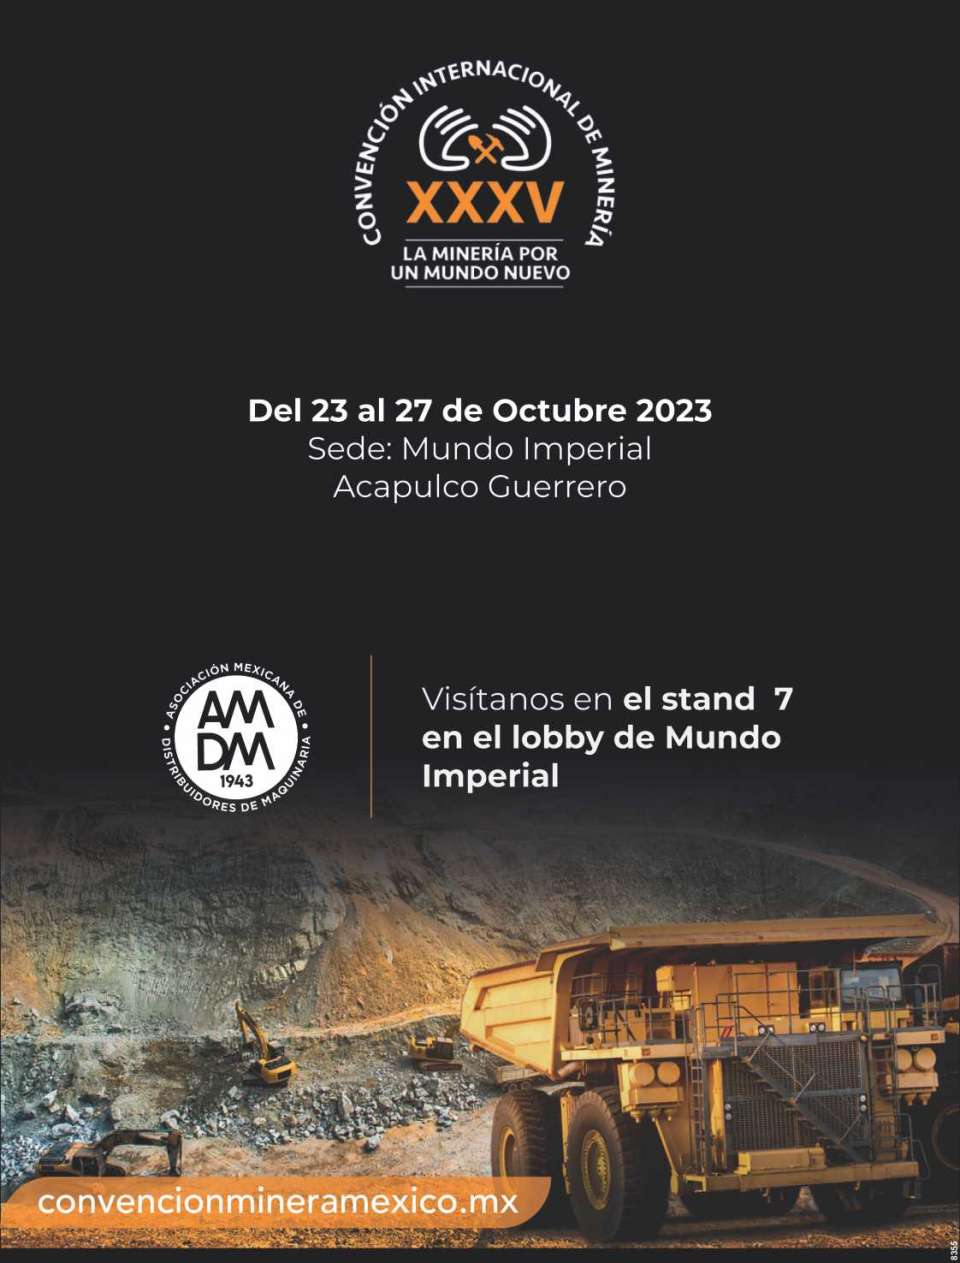 Learn about the Benefits of belonging to the most important Machinery Association in Mexico. Present at Stand 7 at the International Mining Convention.